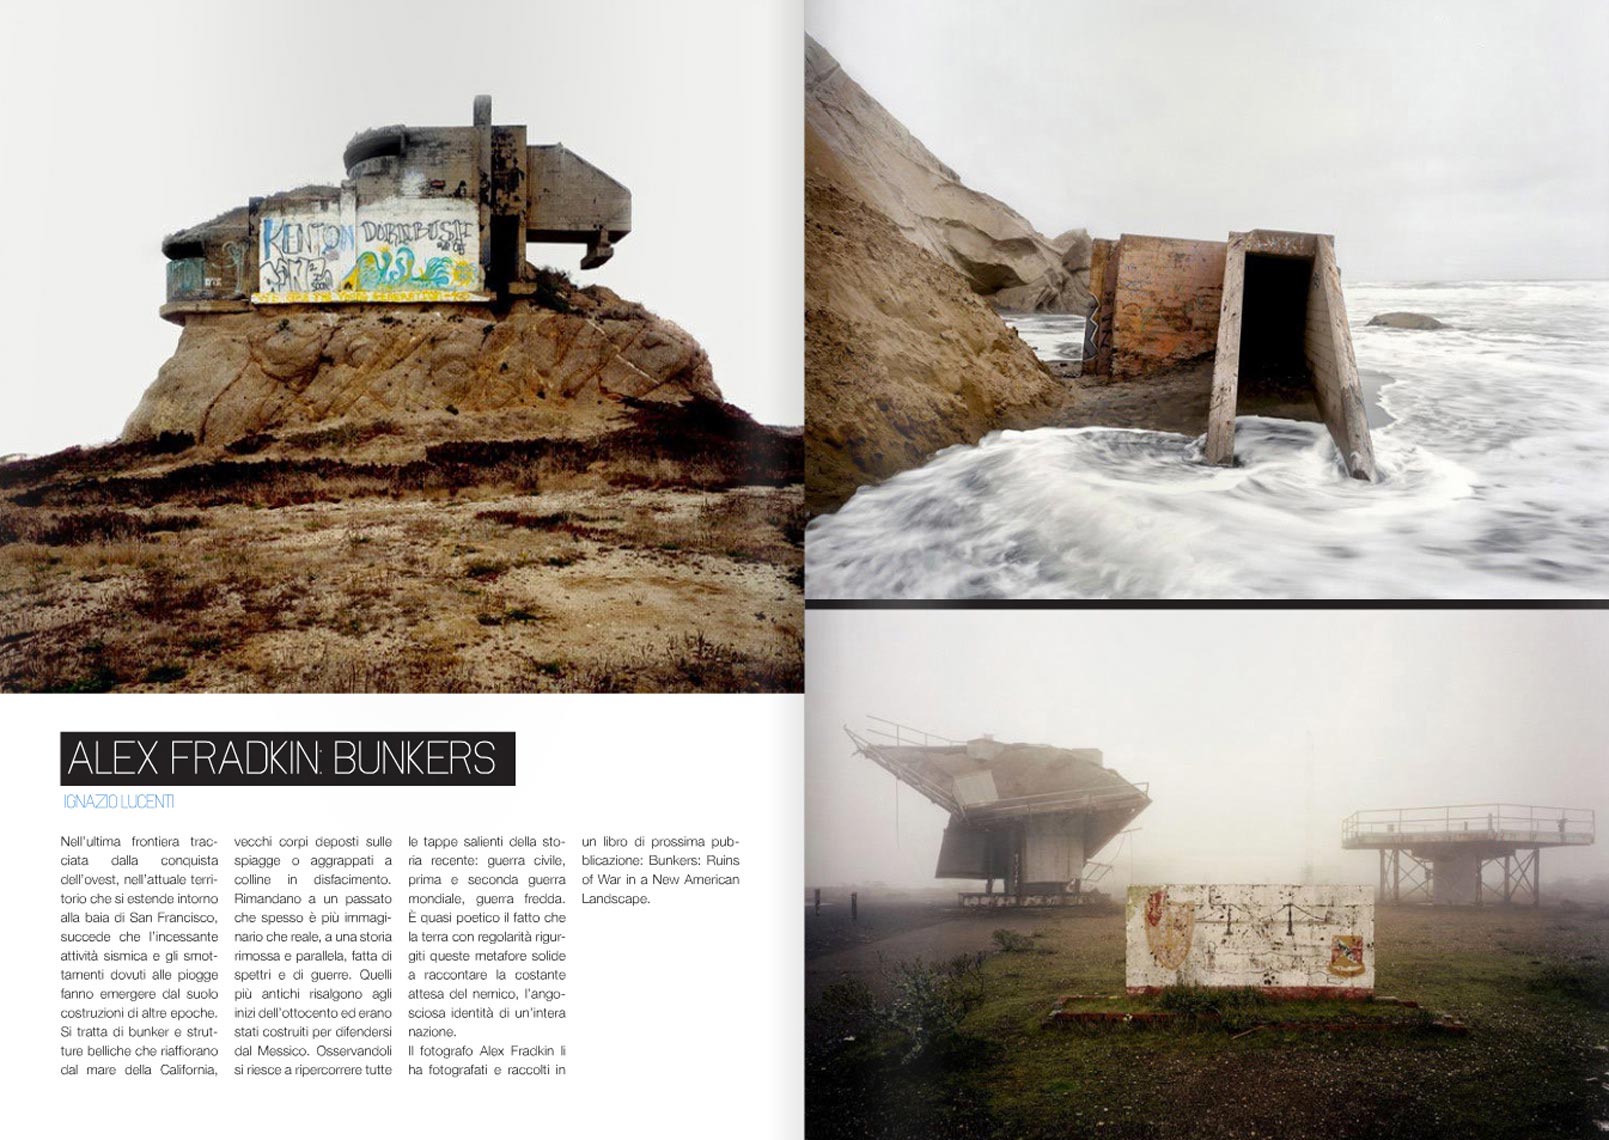 THE BUNKER PROJECT | Press for "The Bunker Project" Work of Alex Fradkin